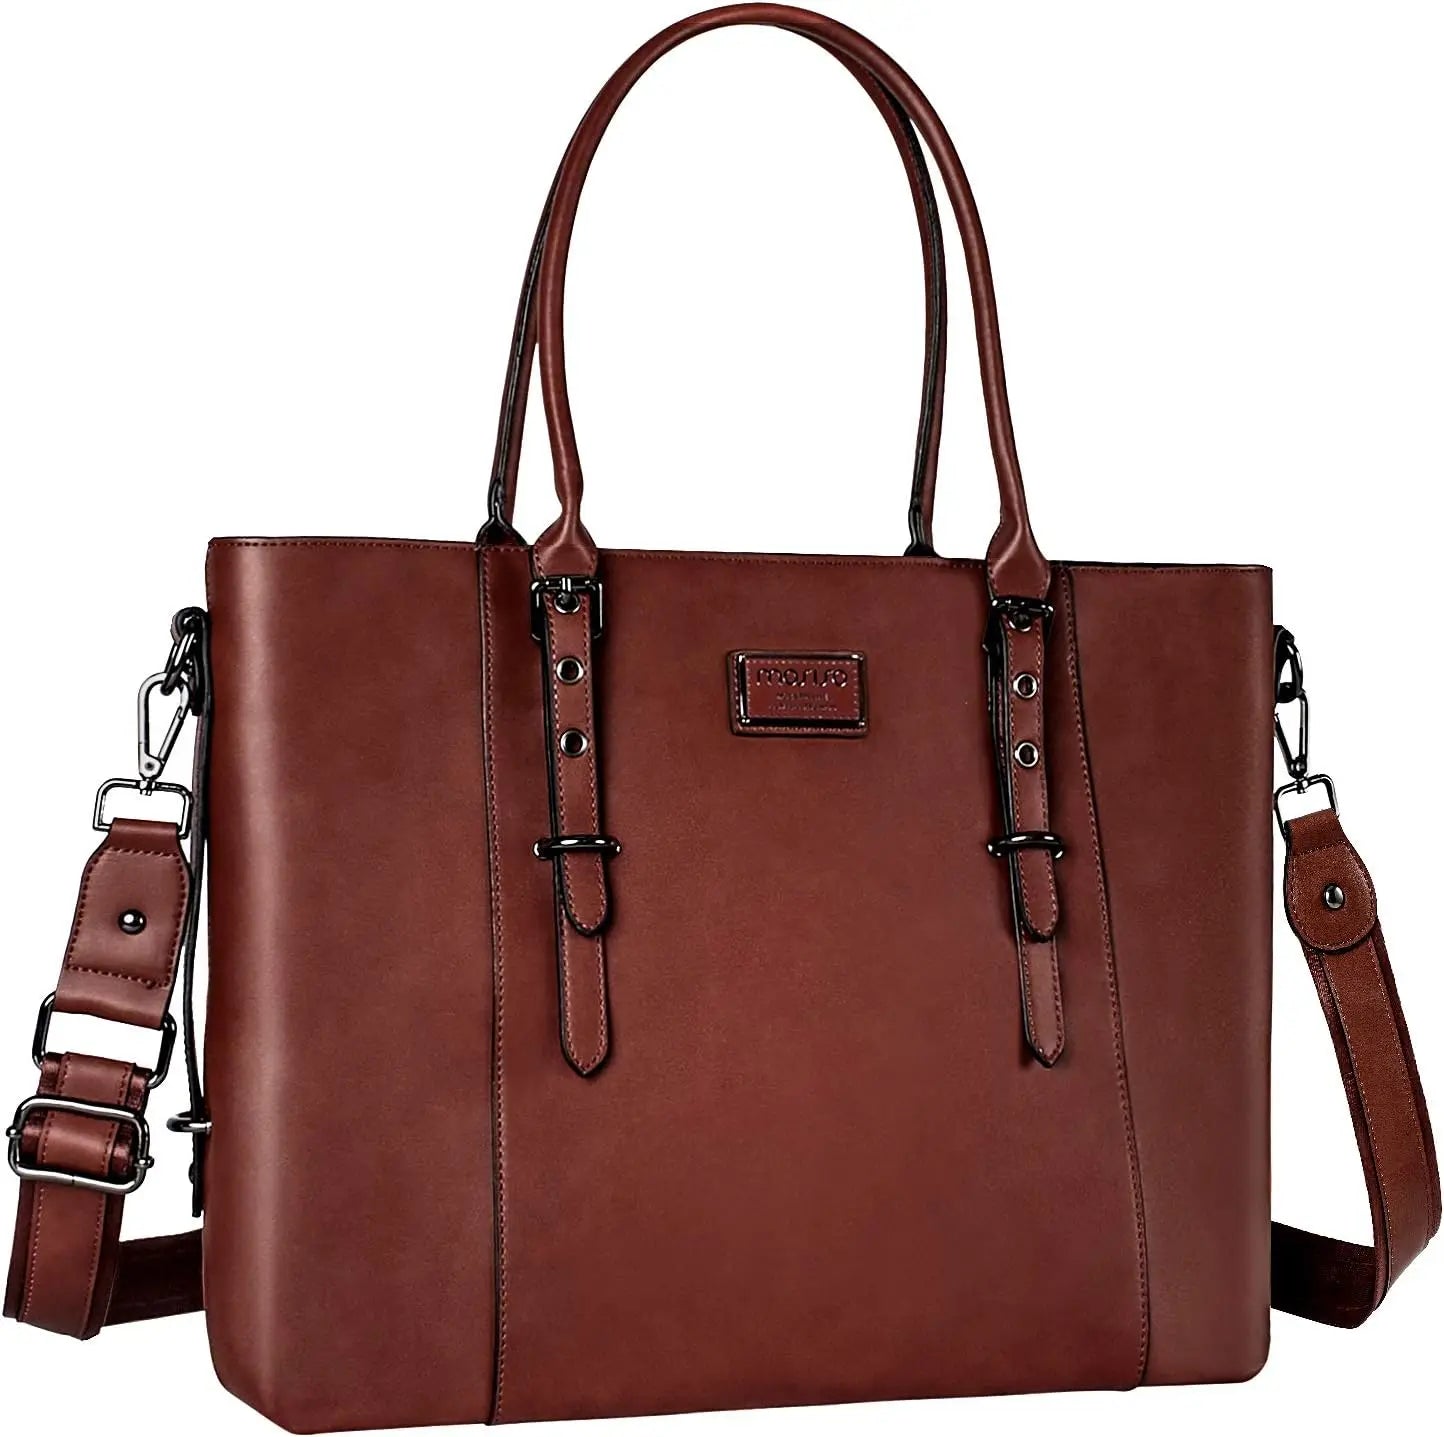 Women's 17 inch Laptop Tote The Store Bags Brown 17.3 inch 